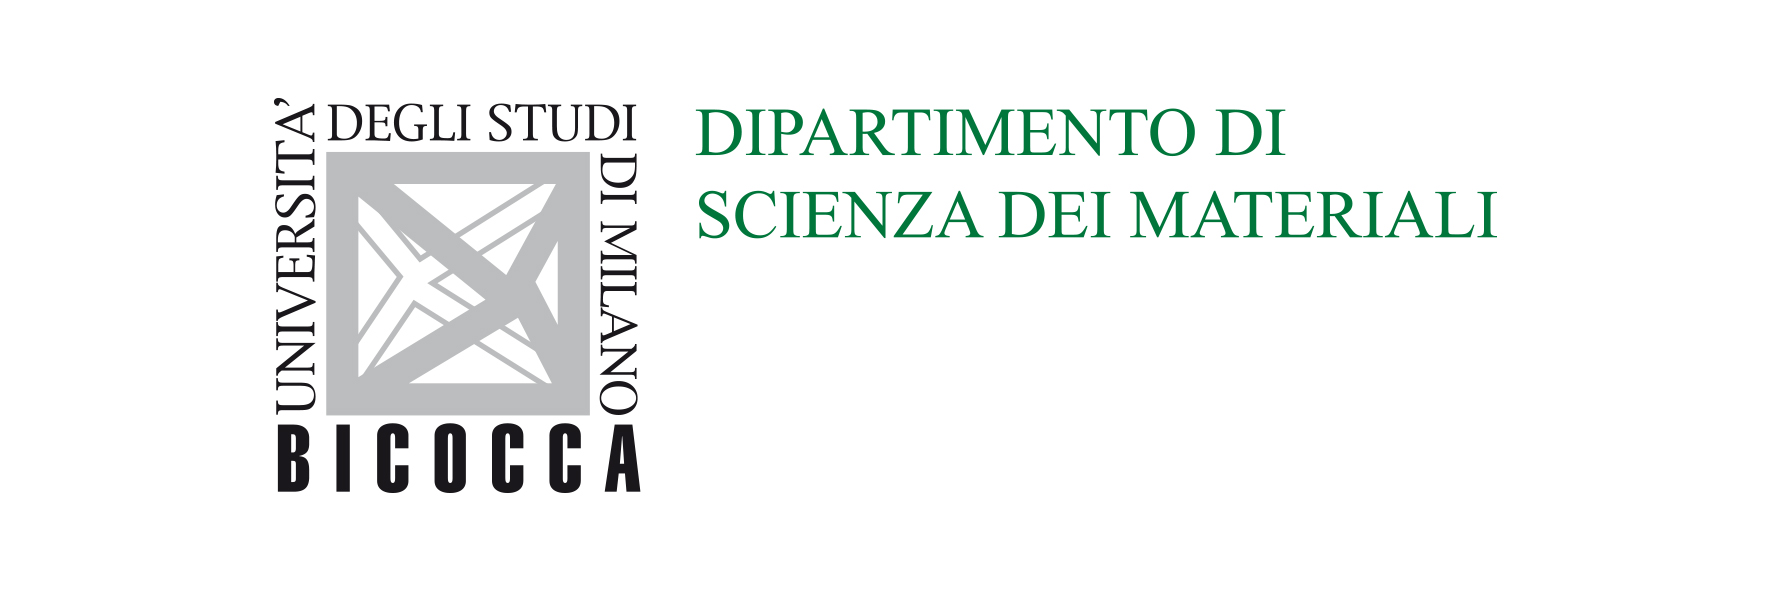 Dipartimento Materials Science